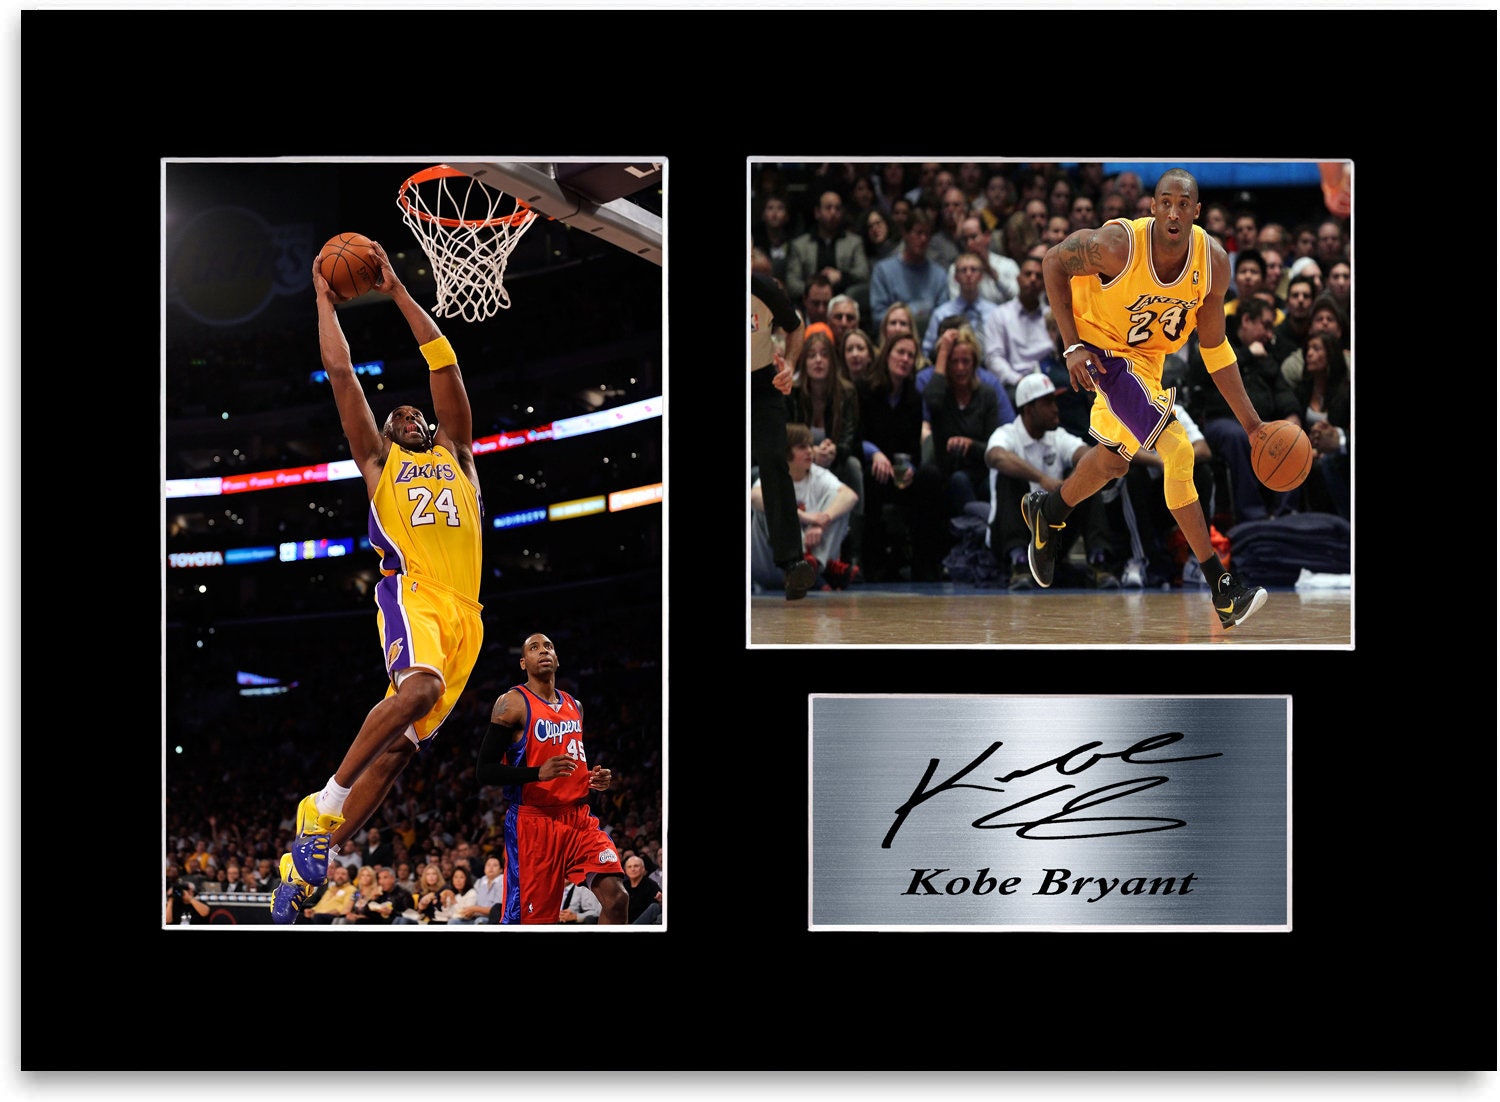 Kobe Bryant Gift Guide: 10 items for the Kobe fanatic in your life